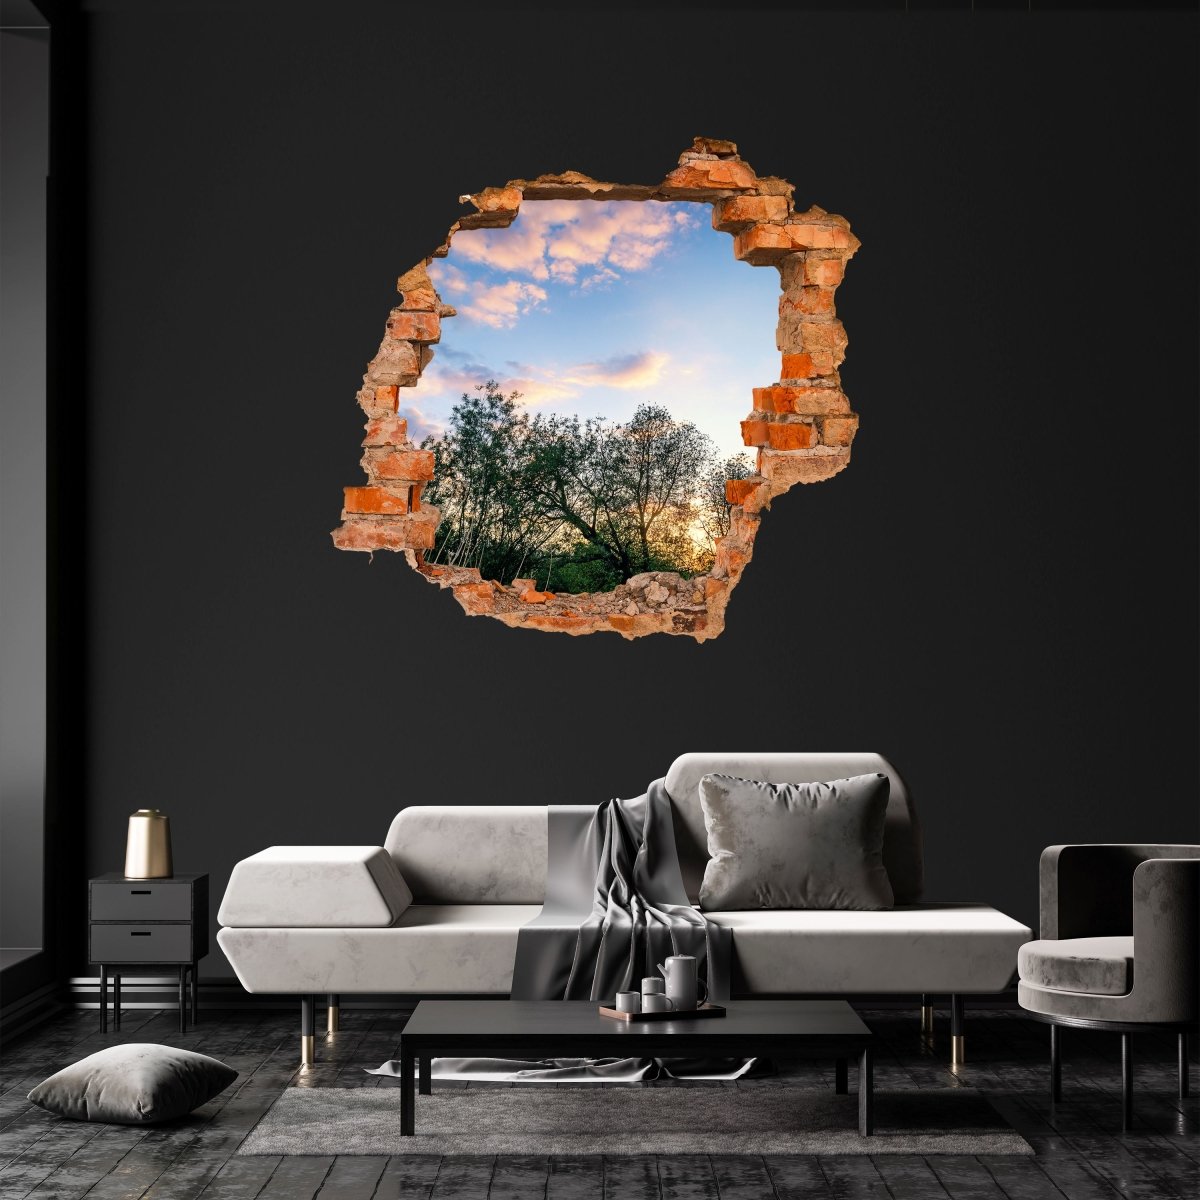 3D wall sticker view over forest &amp; meadows, sun - wall decal M1300